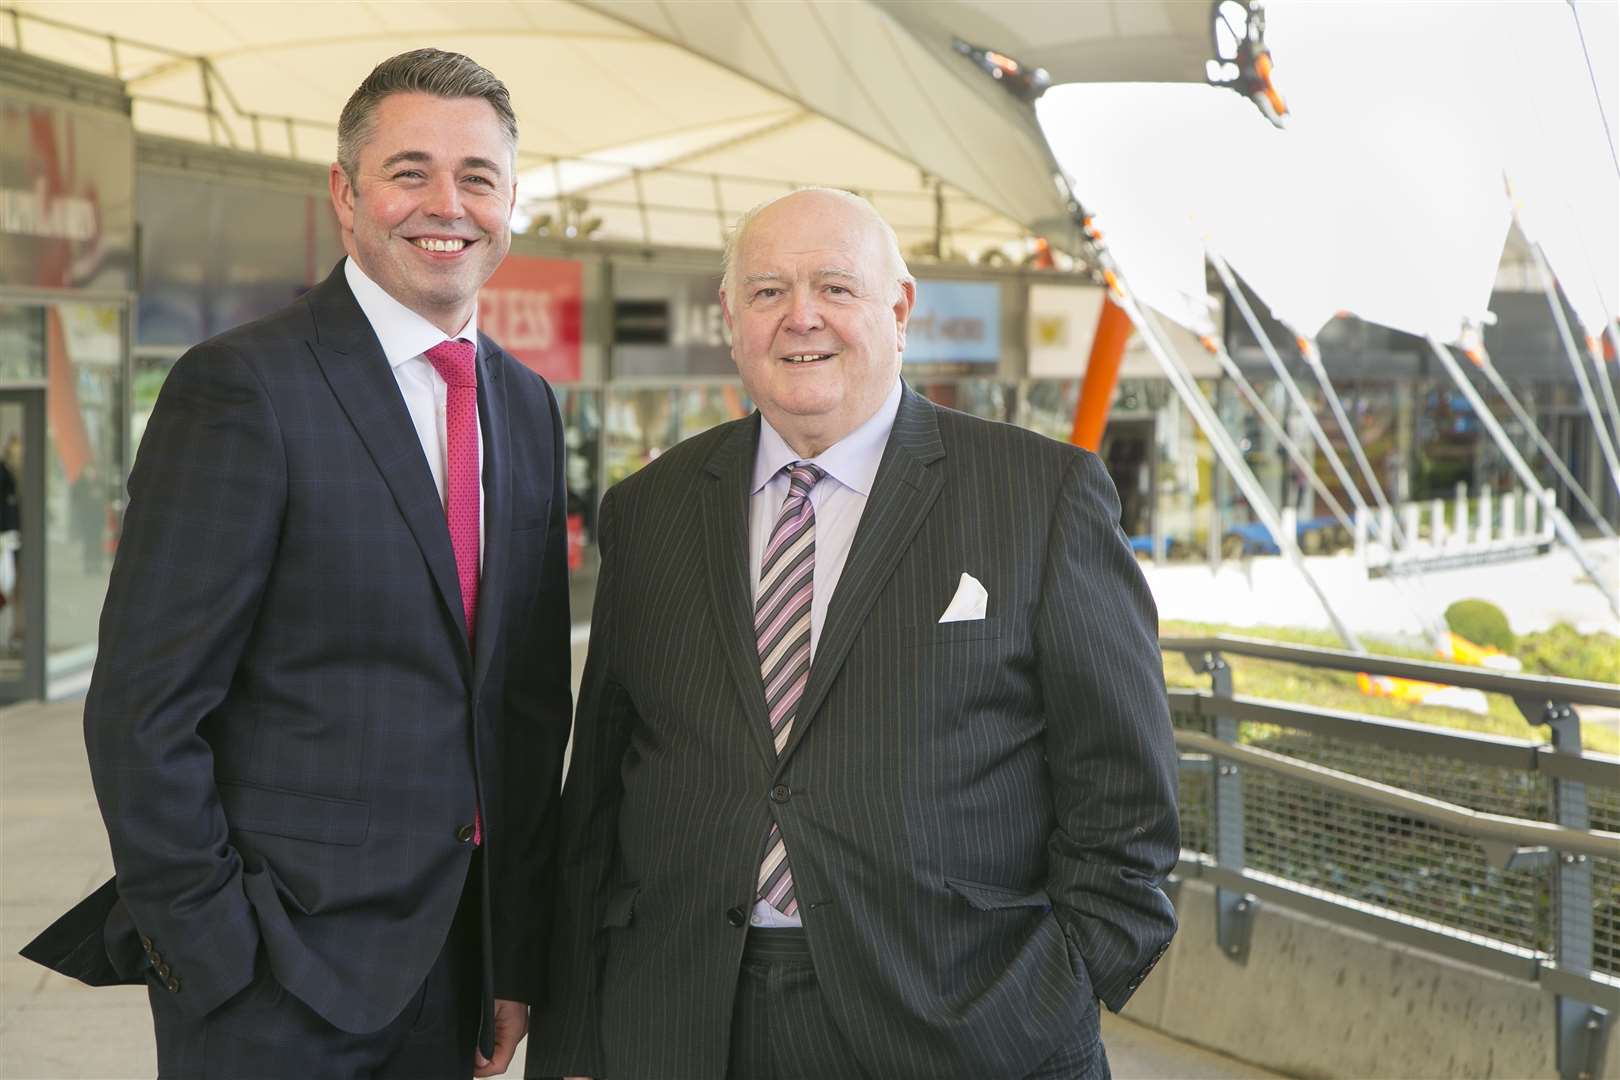 Peter Corr and Cllr Gerry Clarkson at the Designer Outlet (1369693)